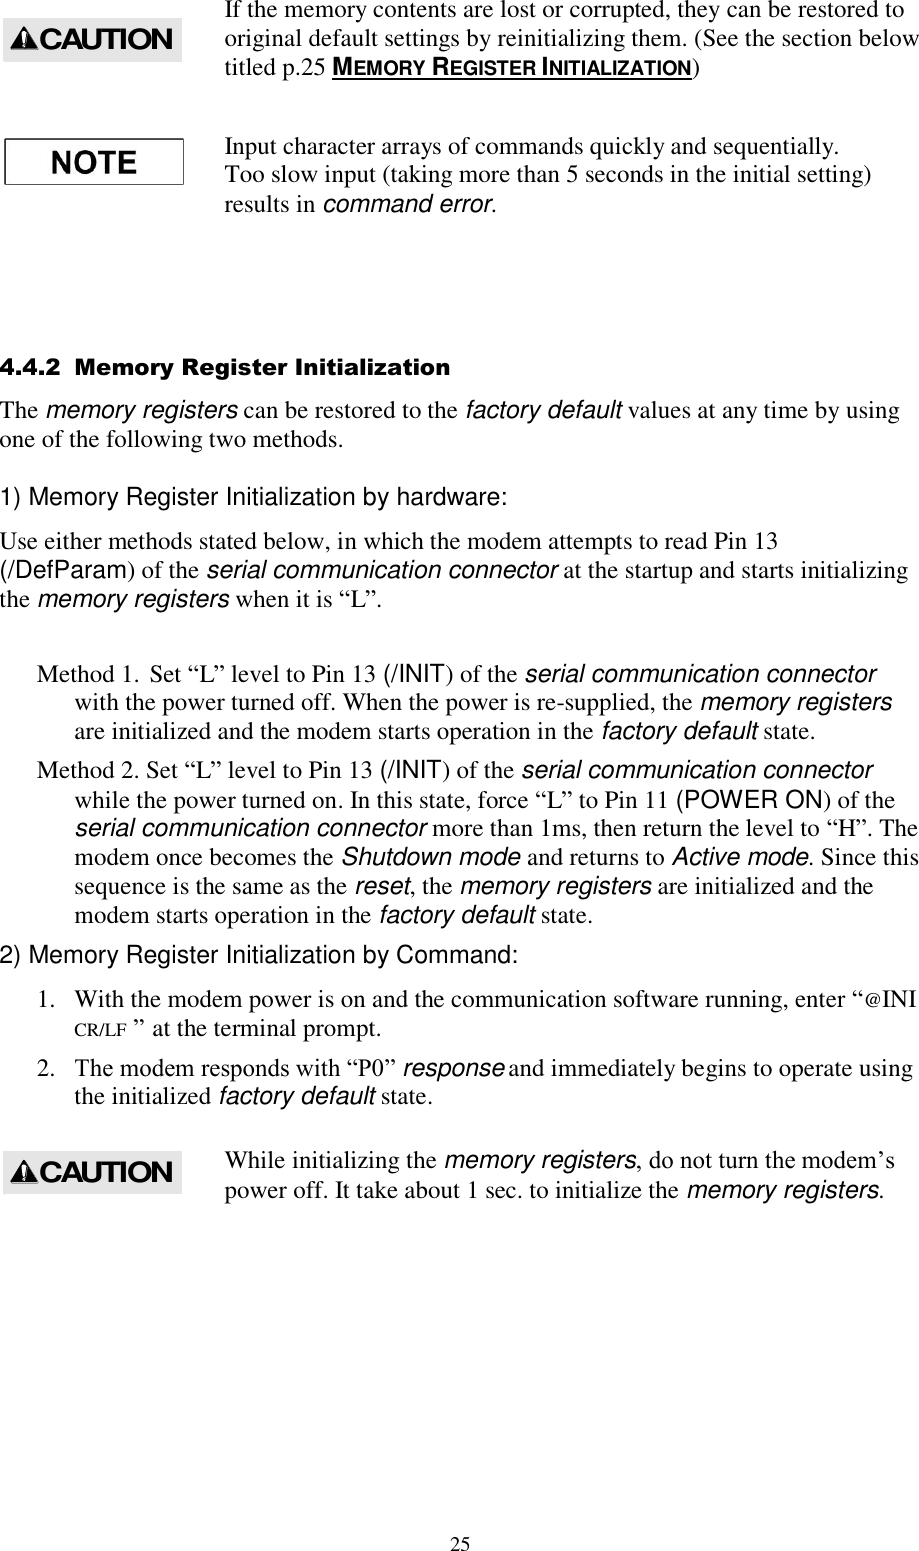  25 If the memory contents are lost or corrupted, they can be restored to original default settings by reinitializing them. (See the section below titled p.25 MEMORY REGISTER INITIALIZATION) Input character arrays of commands quickly and sequentially. Too slow input (taking more than 5 seconds in the initial setting) results in command error.  4.4.2  Memory Register Initialization The memory registers can be restored to the factory default values at any time by using one of the following two methods.  1) Memory Register Initialization by hardware: Use either methods stated below, in which the modem attempts to read Pin 13 (/DefParam) of the serial communication connector at the startup and starts initializing the memory registers when it is “L”.  Method 1. Set “L” level to Pin 13 (/INIT) of the serial communication connector  with the power turned off. When the power is re-supplied, the memory registers are initialized and the modem starts operation in the factory default state. Method 2. Set “L” level to Pin 13 (/INIT) of the serial communication connector while the power turned on. In this state, force “L” to Pin 11 (POWER ON) of the serial communication connector more than 1ms, then return the level to “H”. The modem once becomes the Shutdown mode and returns to Active mode. Since this sequence is the same as the reset, the memory registers are initialized and the modem starts operation in the factory default state. 2) Memory Register Initialization by Command: 1.  With the modem power is on and the communication software running, enter “@INI CR/LF”  at the terminal prompt. 2.  The modem responds with “P0” response and immediately begins to operate using the initialized factory default state. While initializing the memory registers, do not turn the modem’s power off. It take about 1 sec. to initialize the memory registers.  CAUTIONCAUTION